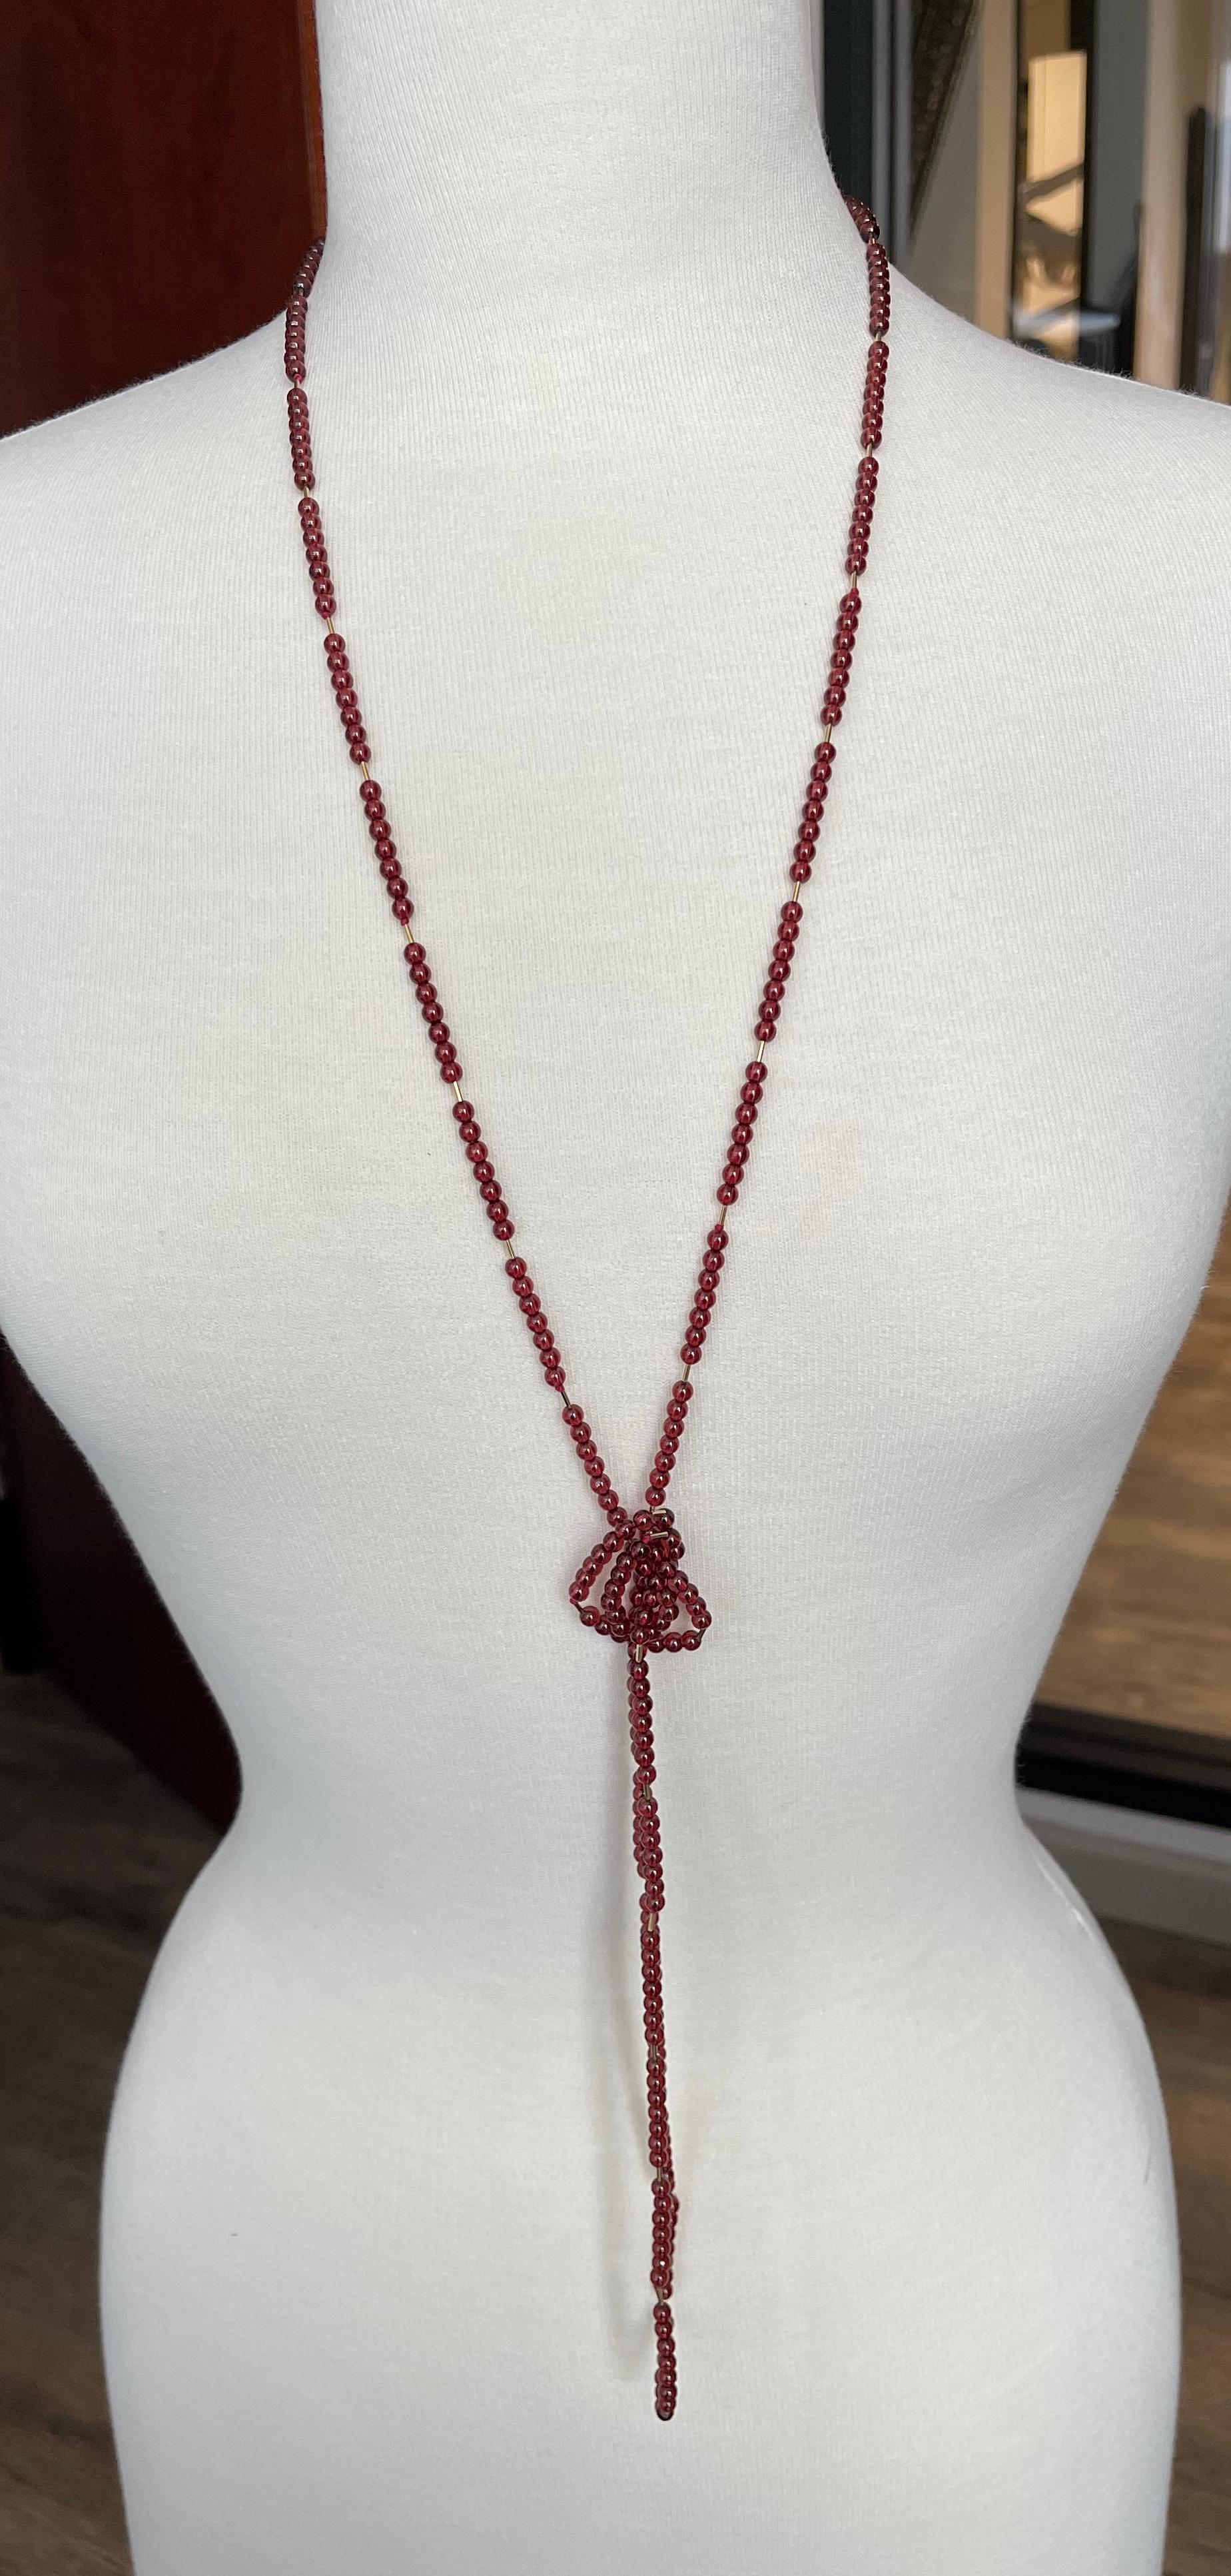 Cranberry Garnet Rope Necklace with Yellow Gold Accents & Clasp, 54 Inches For Sale 3